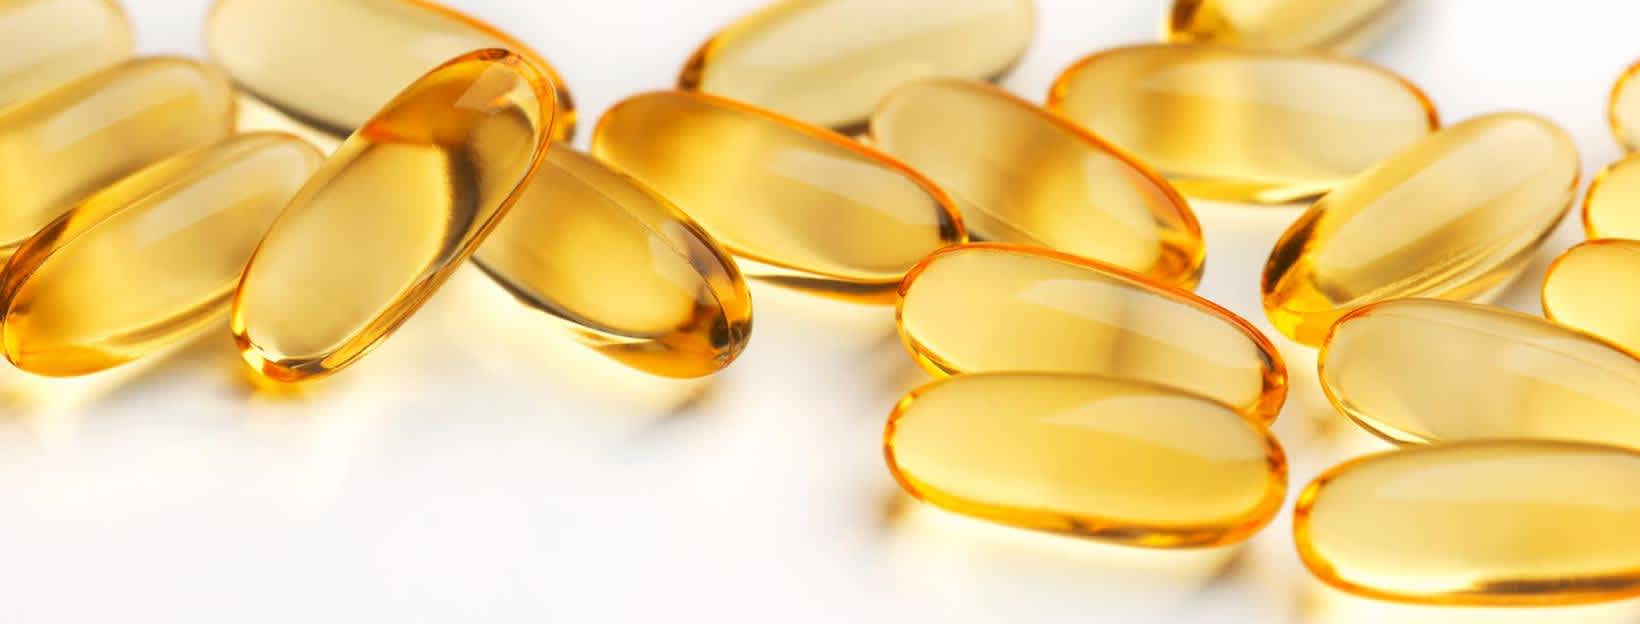 Fish oil supplements on white background